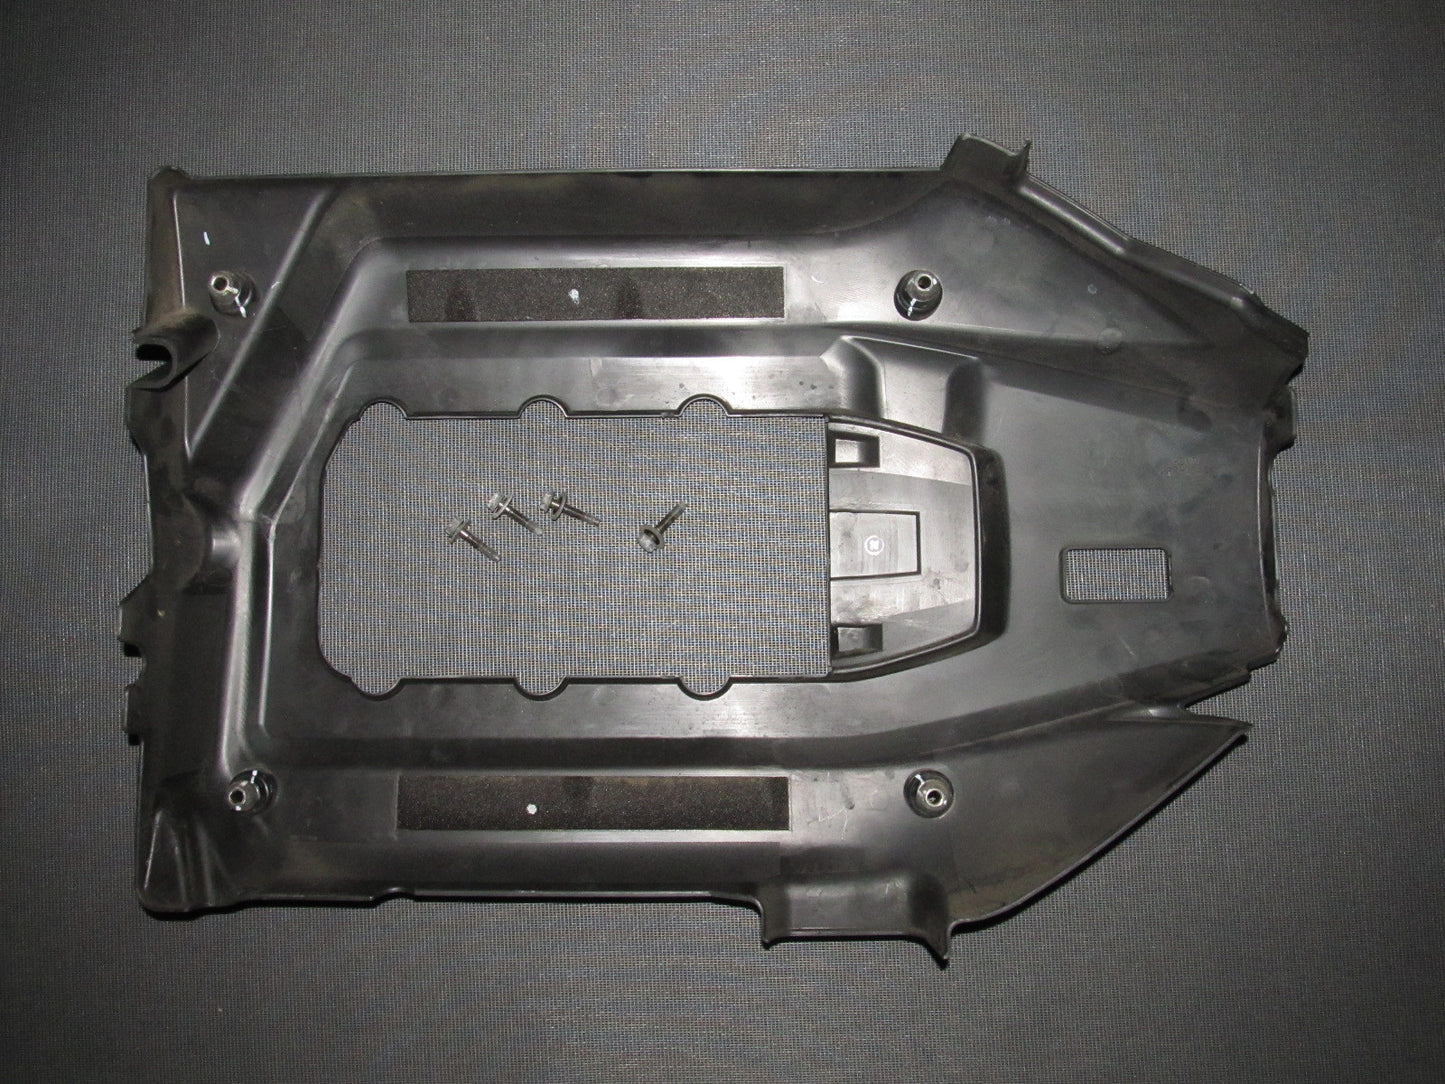 01 02 03 Acura CL OEM Type-S Engine Cover